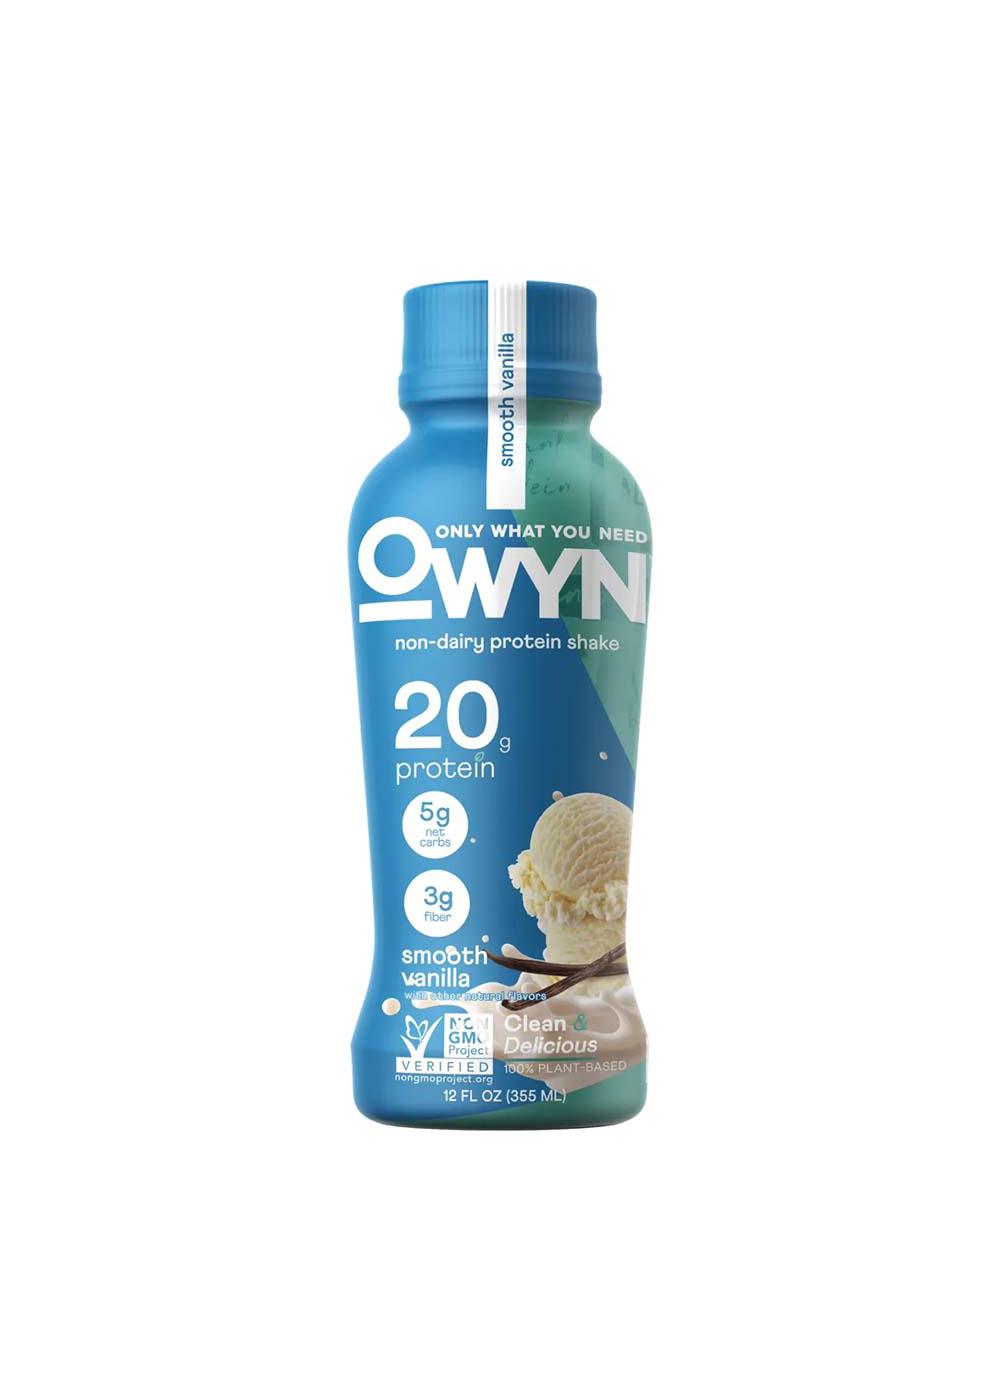 OWYN Smooth Vanilla Protein Drink; image 1 of 2